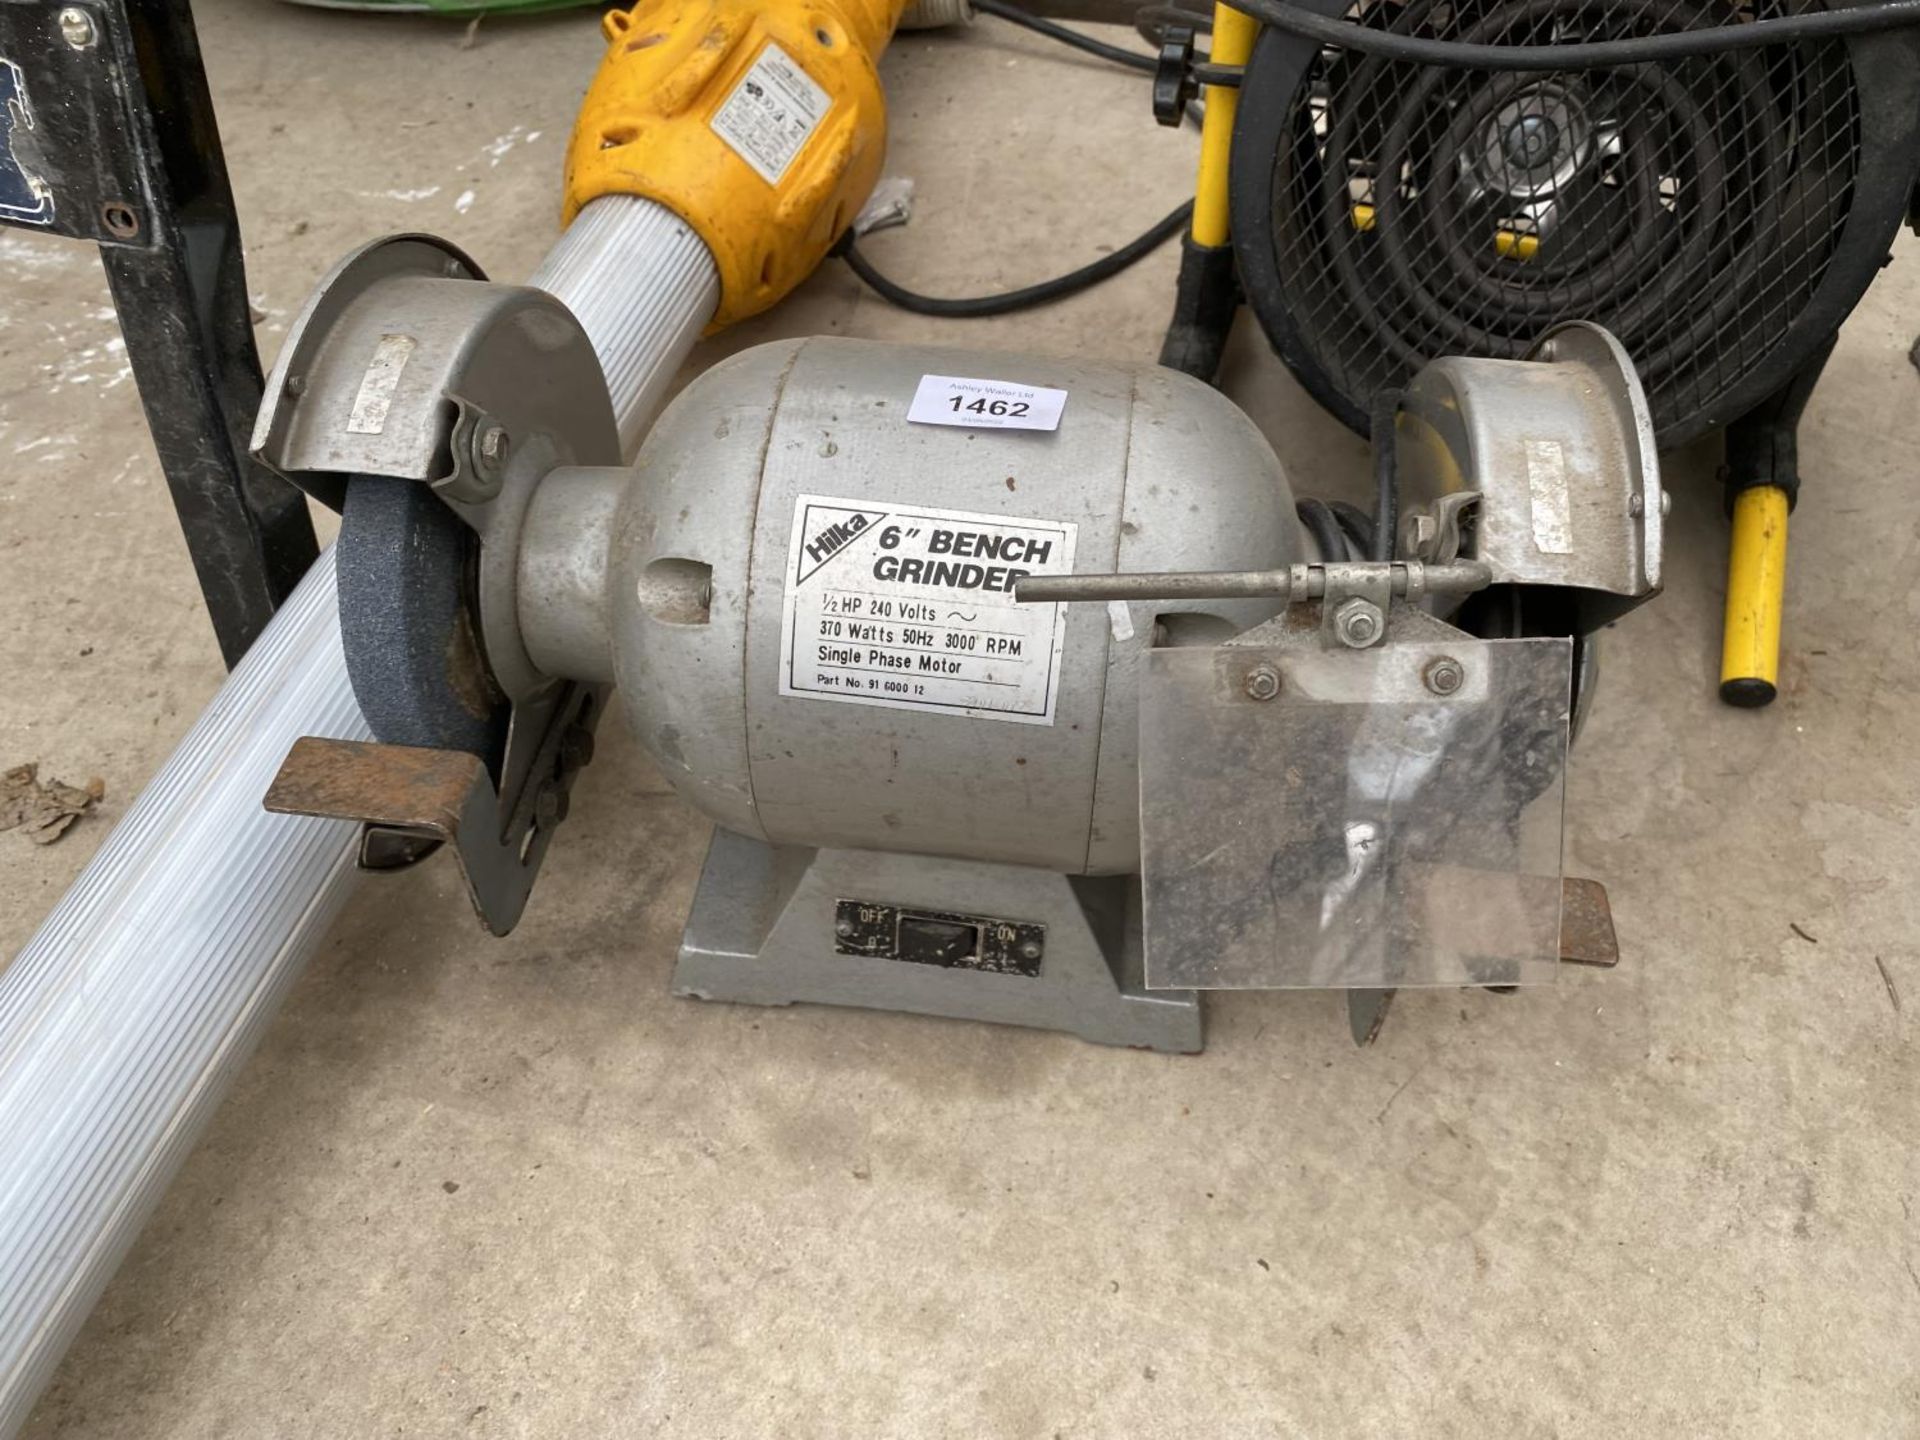 A HLKA 6" BENCH GRINDER, A STANLEY HEATER AND A WORK LIGHT - Image 5 of 6